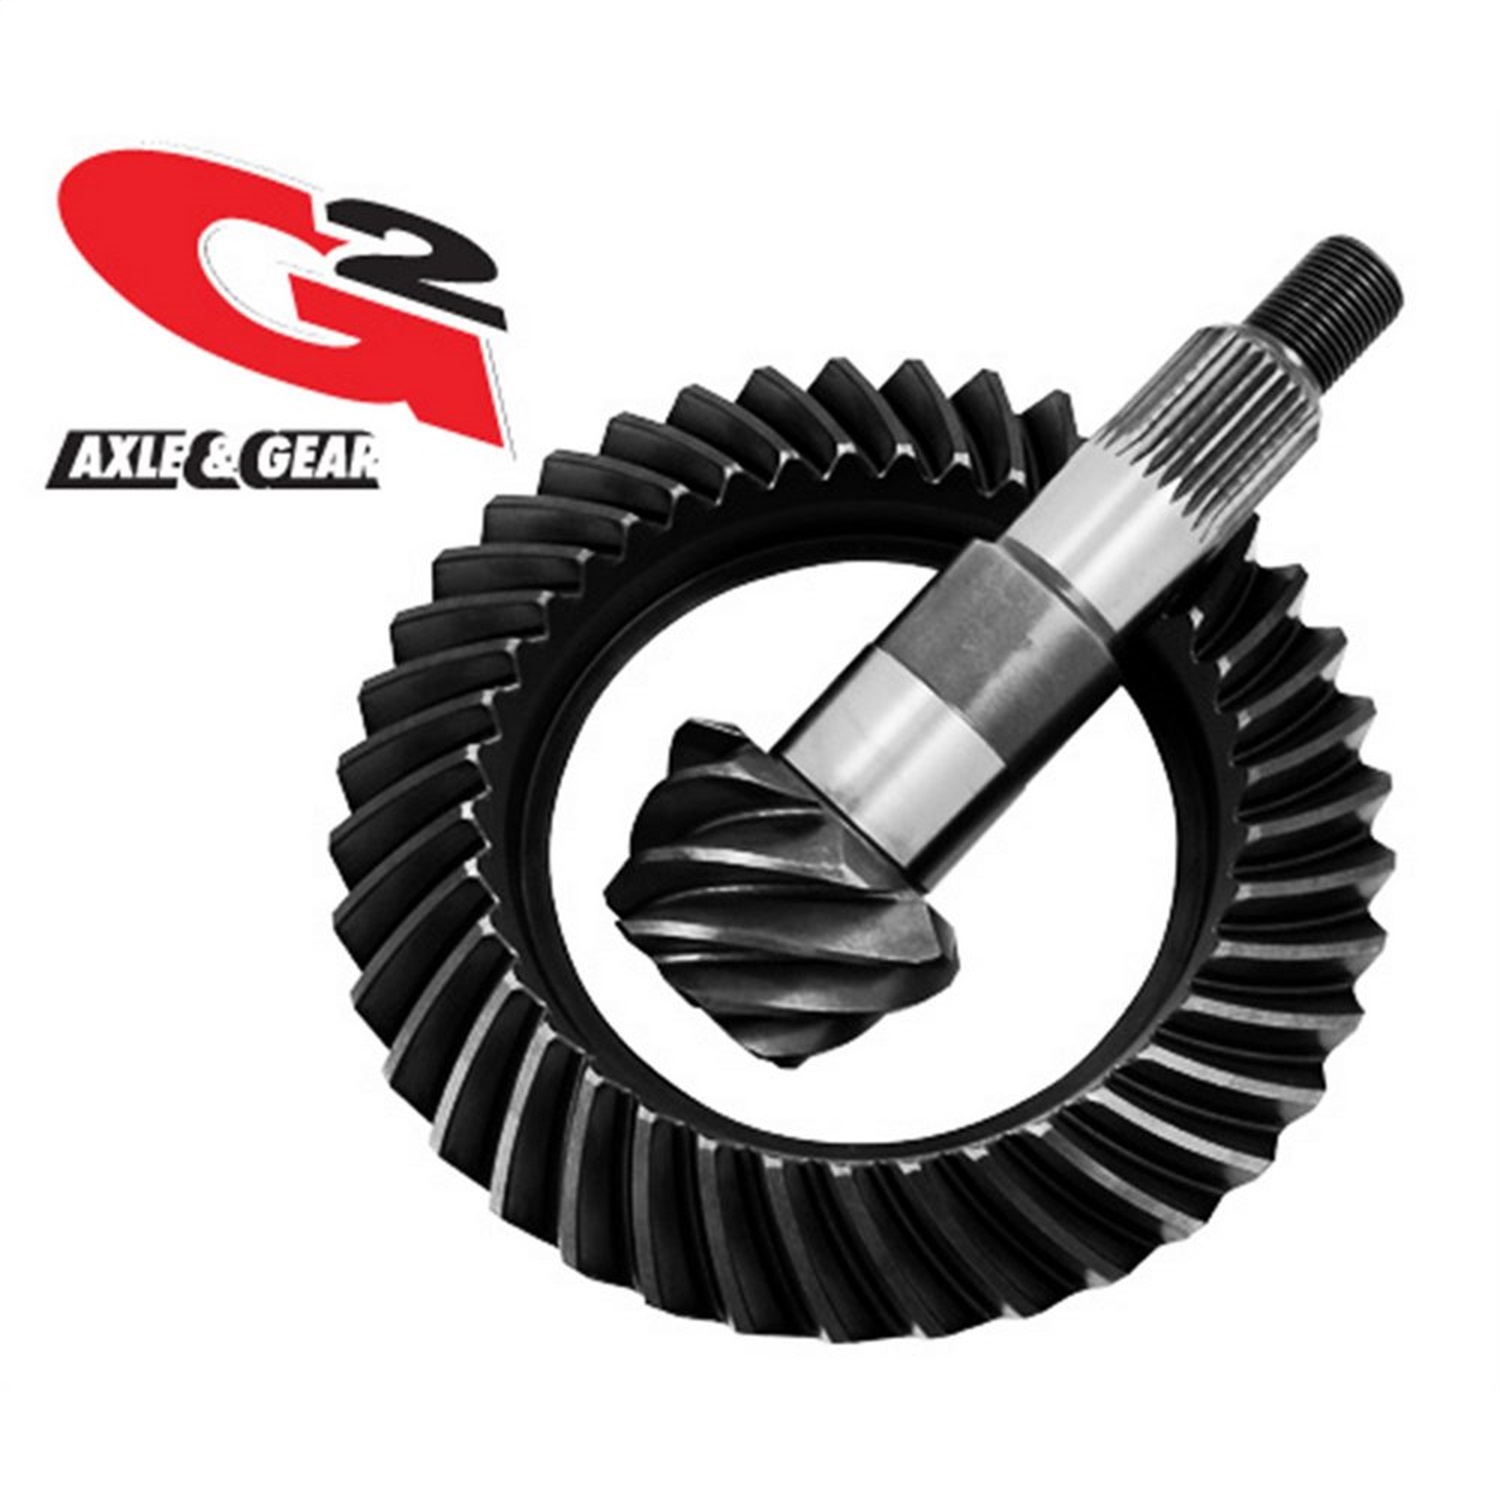 G2 Axle and Gear G2 Axle and Gear 1-2096-410 Ring and Pinion